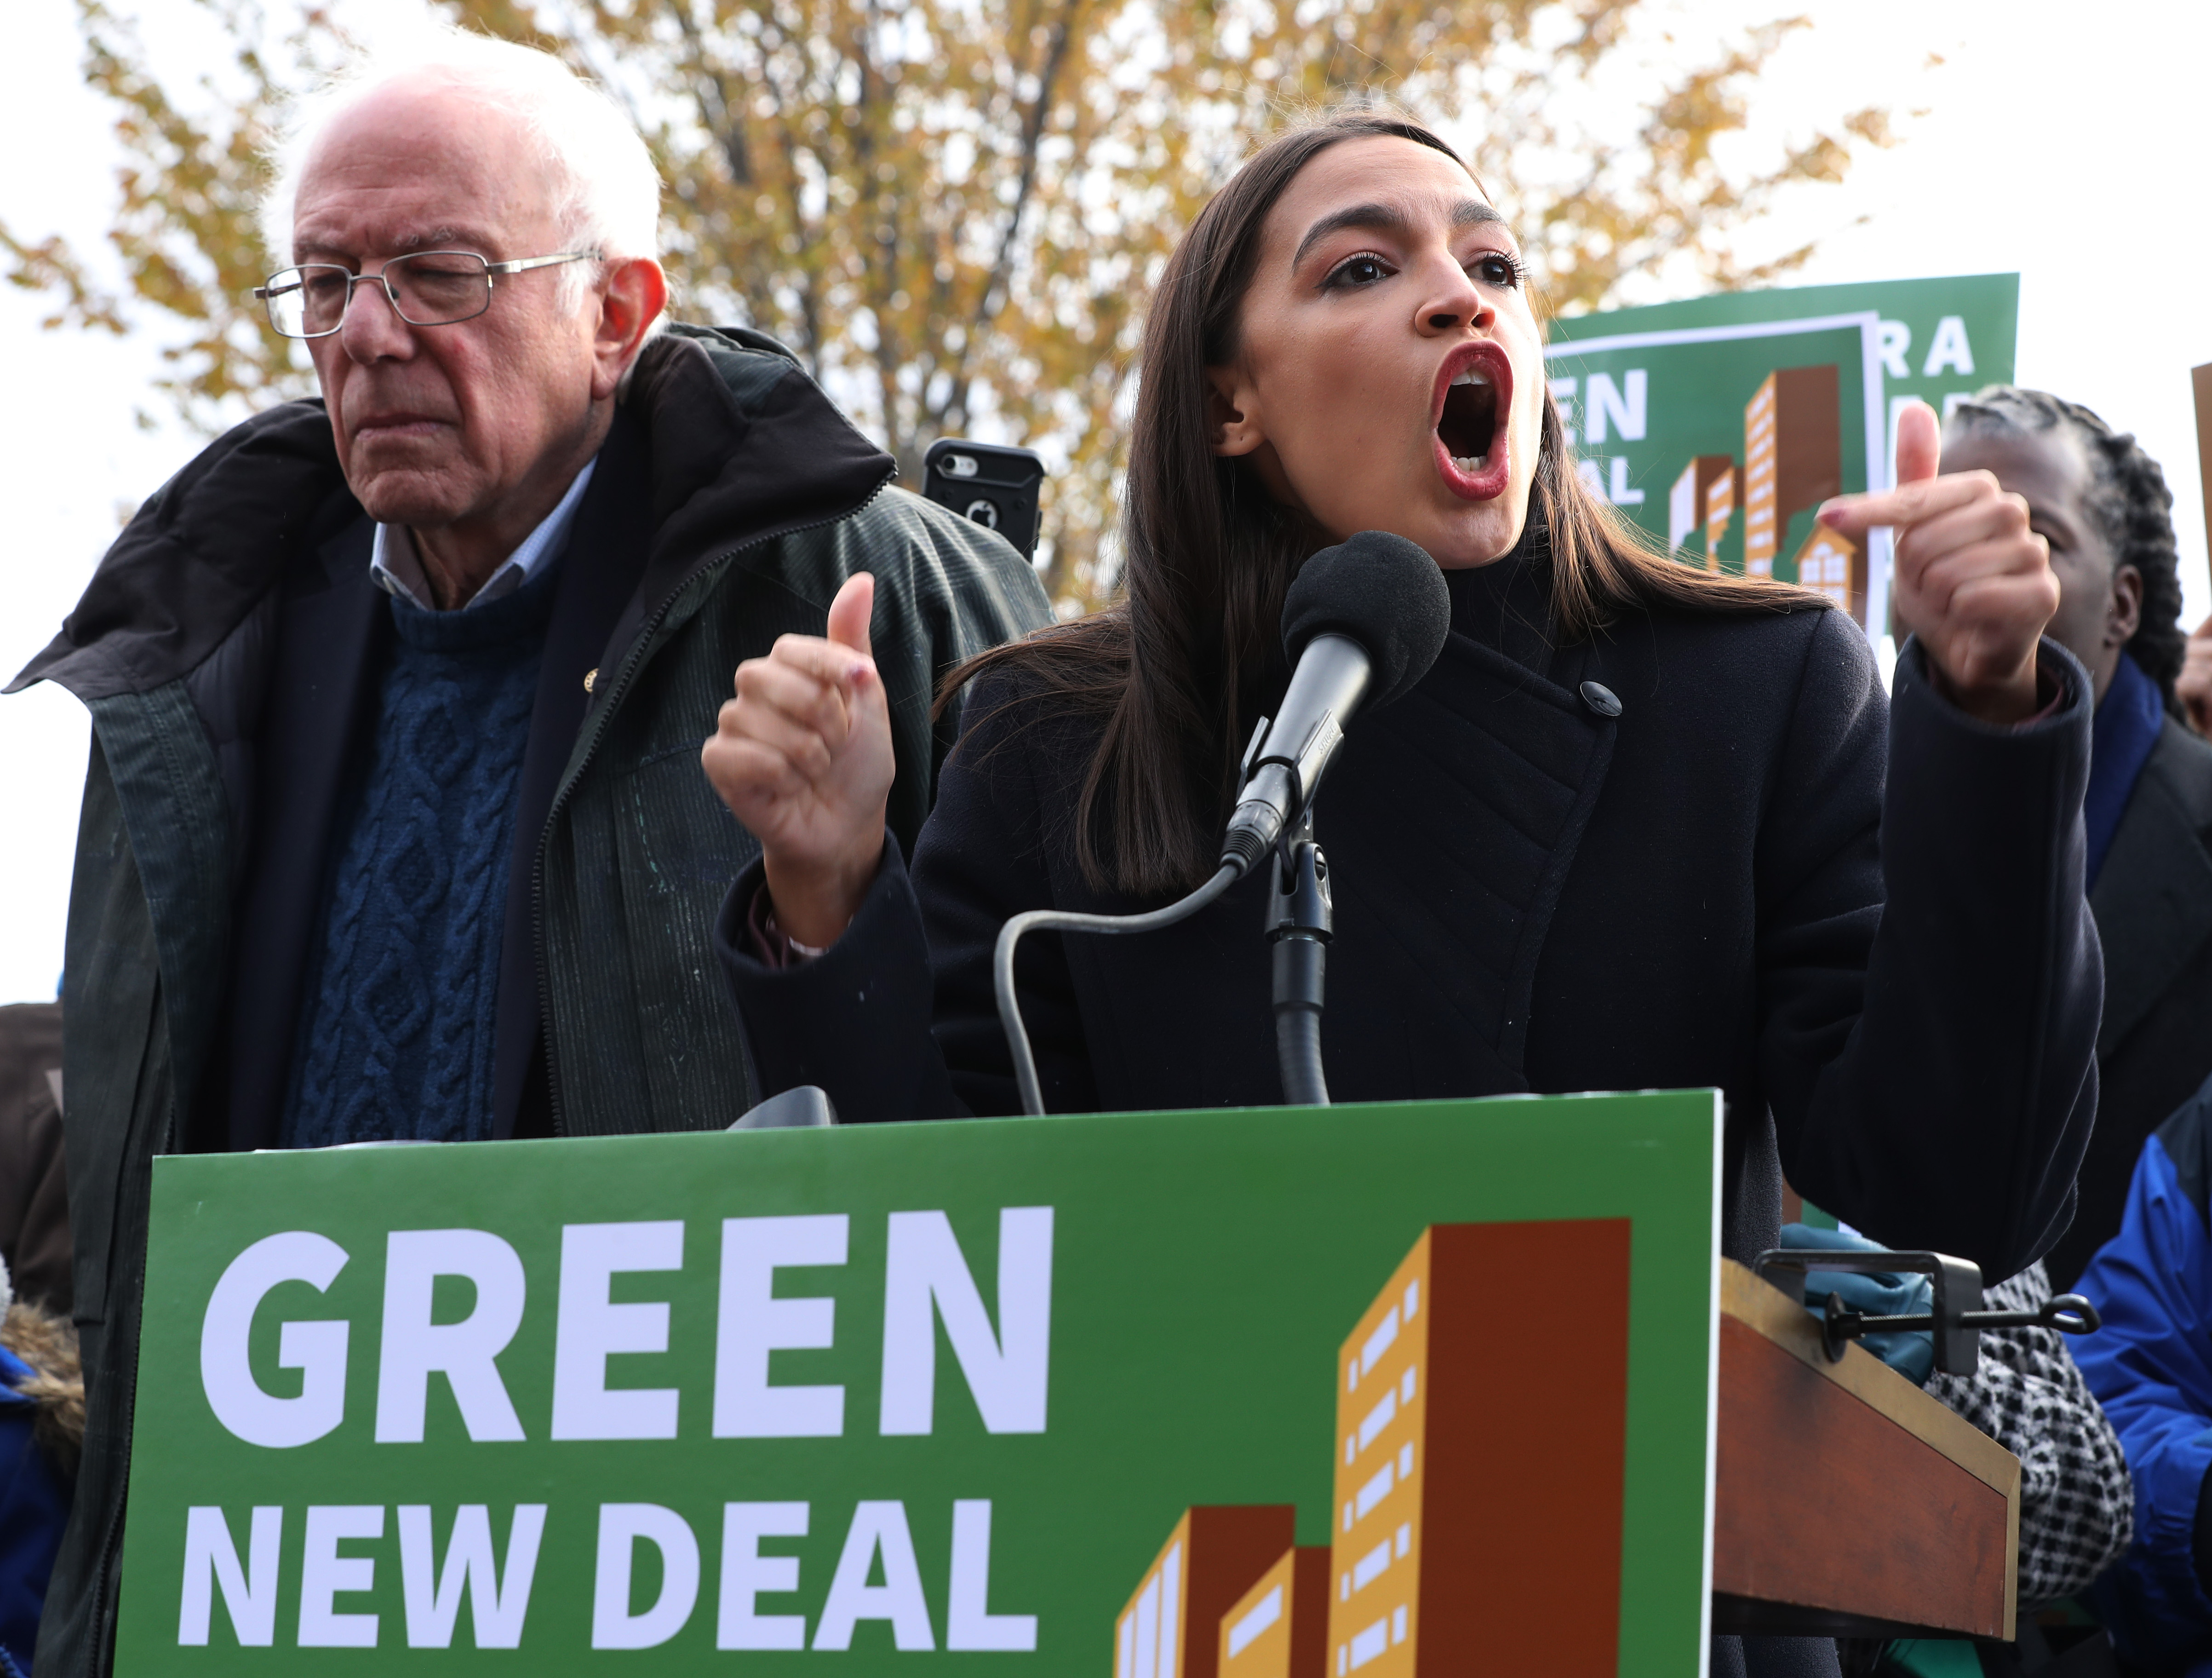 WASHINGTON, DC - NOVEMBER 14: Democratic presidential candidate Sen. Bernie Sanders (I-VT) (L) and Rep. Alexandria Ocasio-Cortez (D-NY) hold a news conference to introduce legislation to transform public housing as part of their Green New Deal proposal outside the U.S. Capitol November 14, 2019 in Washington, DC. The liberal legislators invited affordable housing advocates and climate change activists to join them for the announcement. (Photo by Chip Somodevilla/Getty Images)